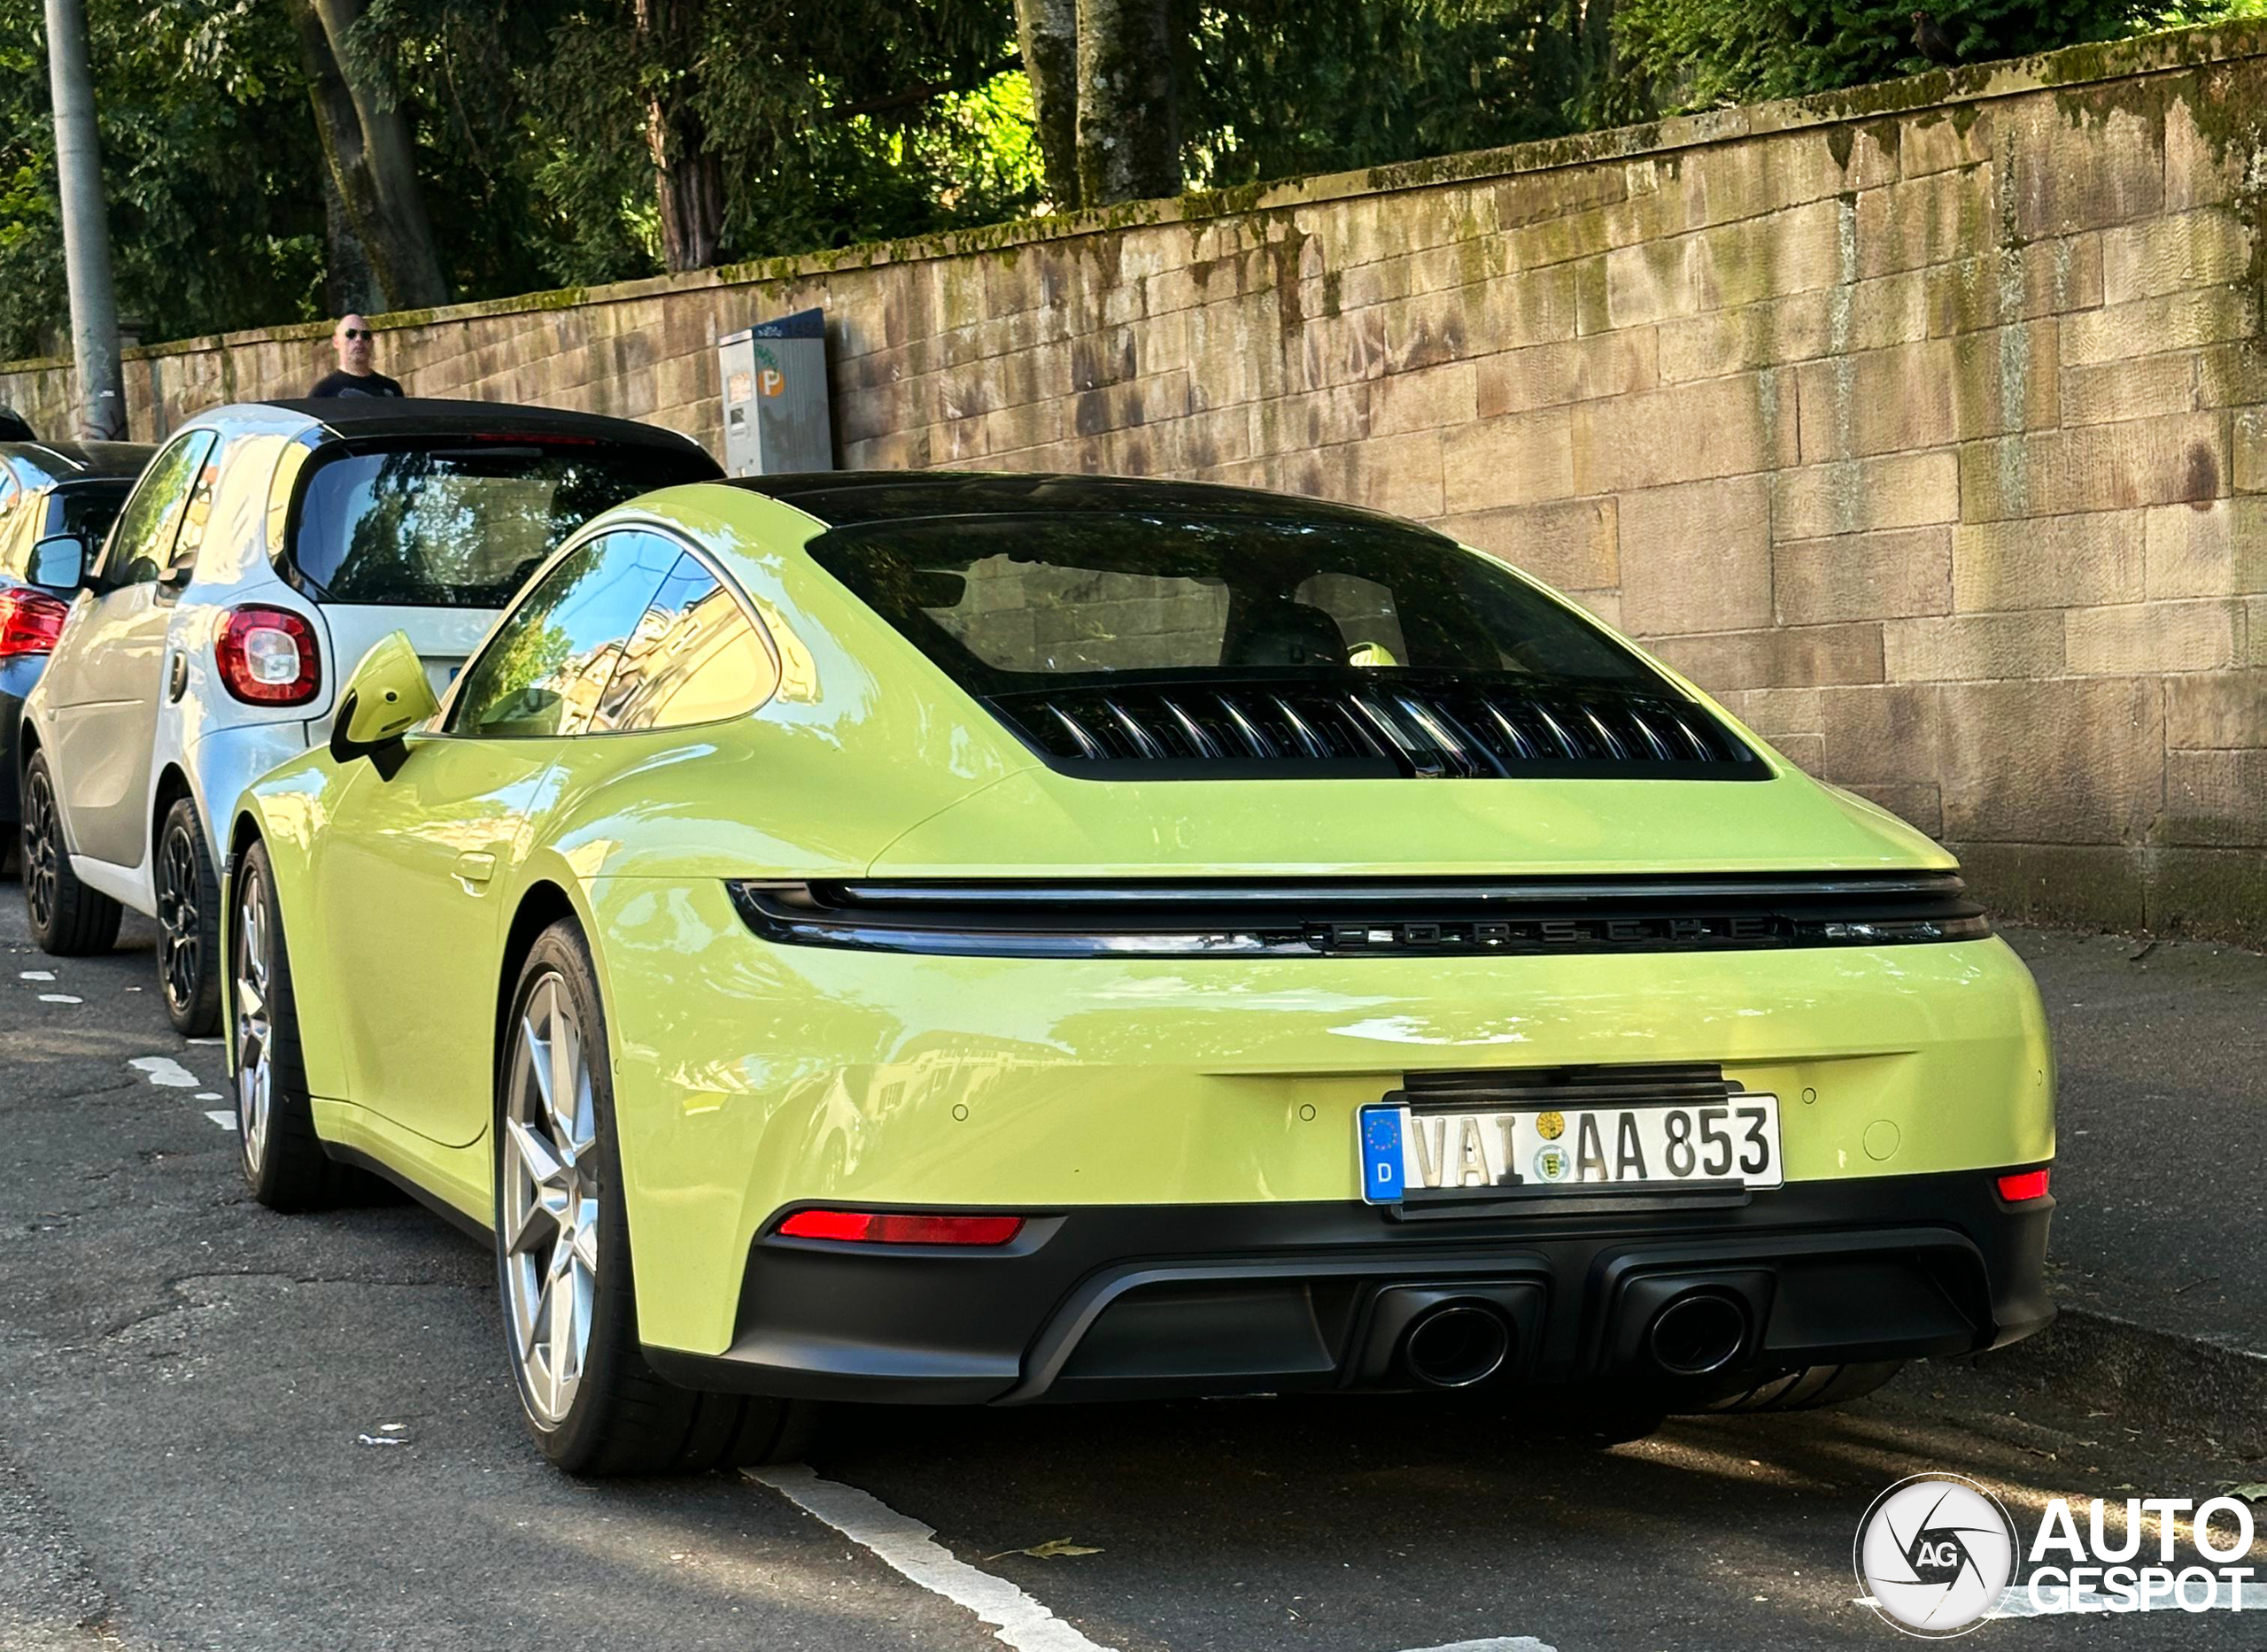 This is the first 992 MkII without camouflage